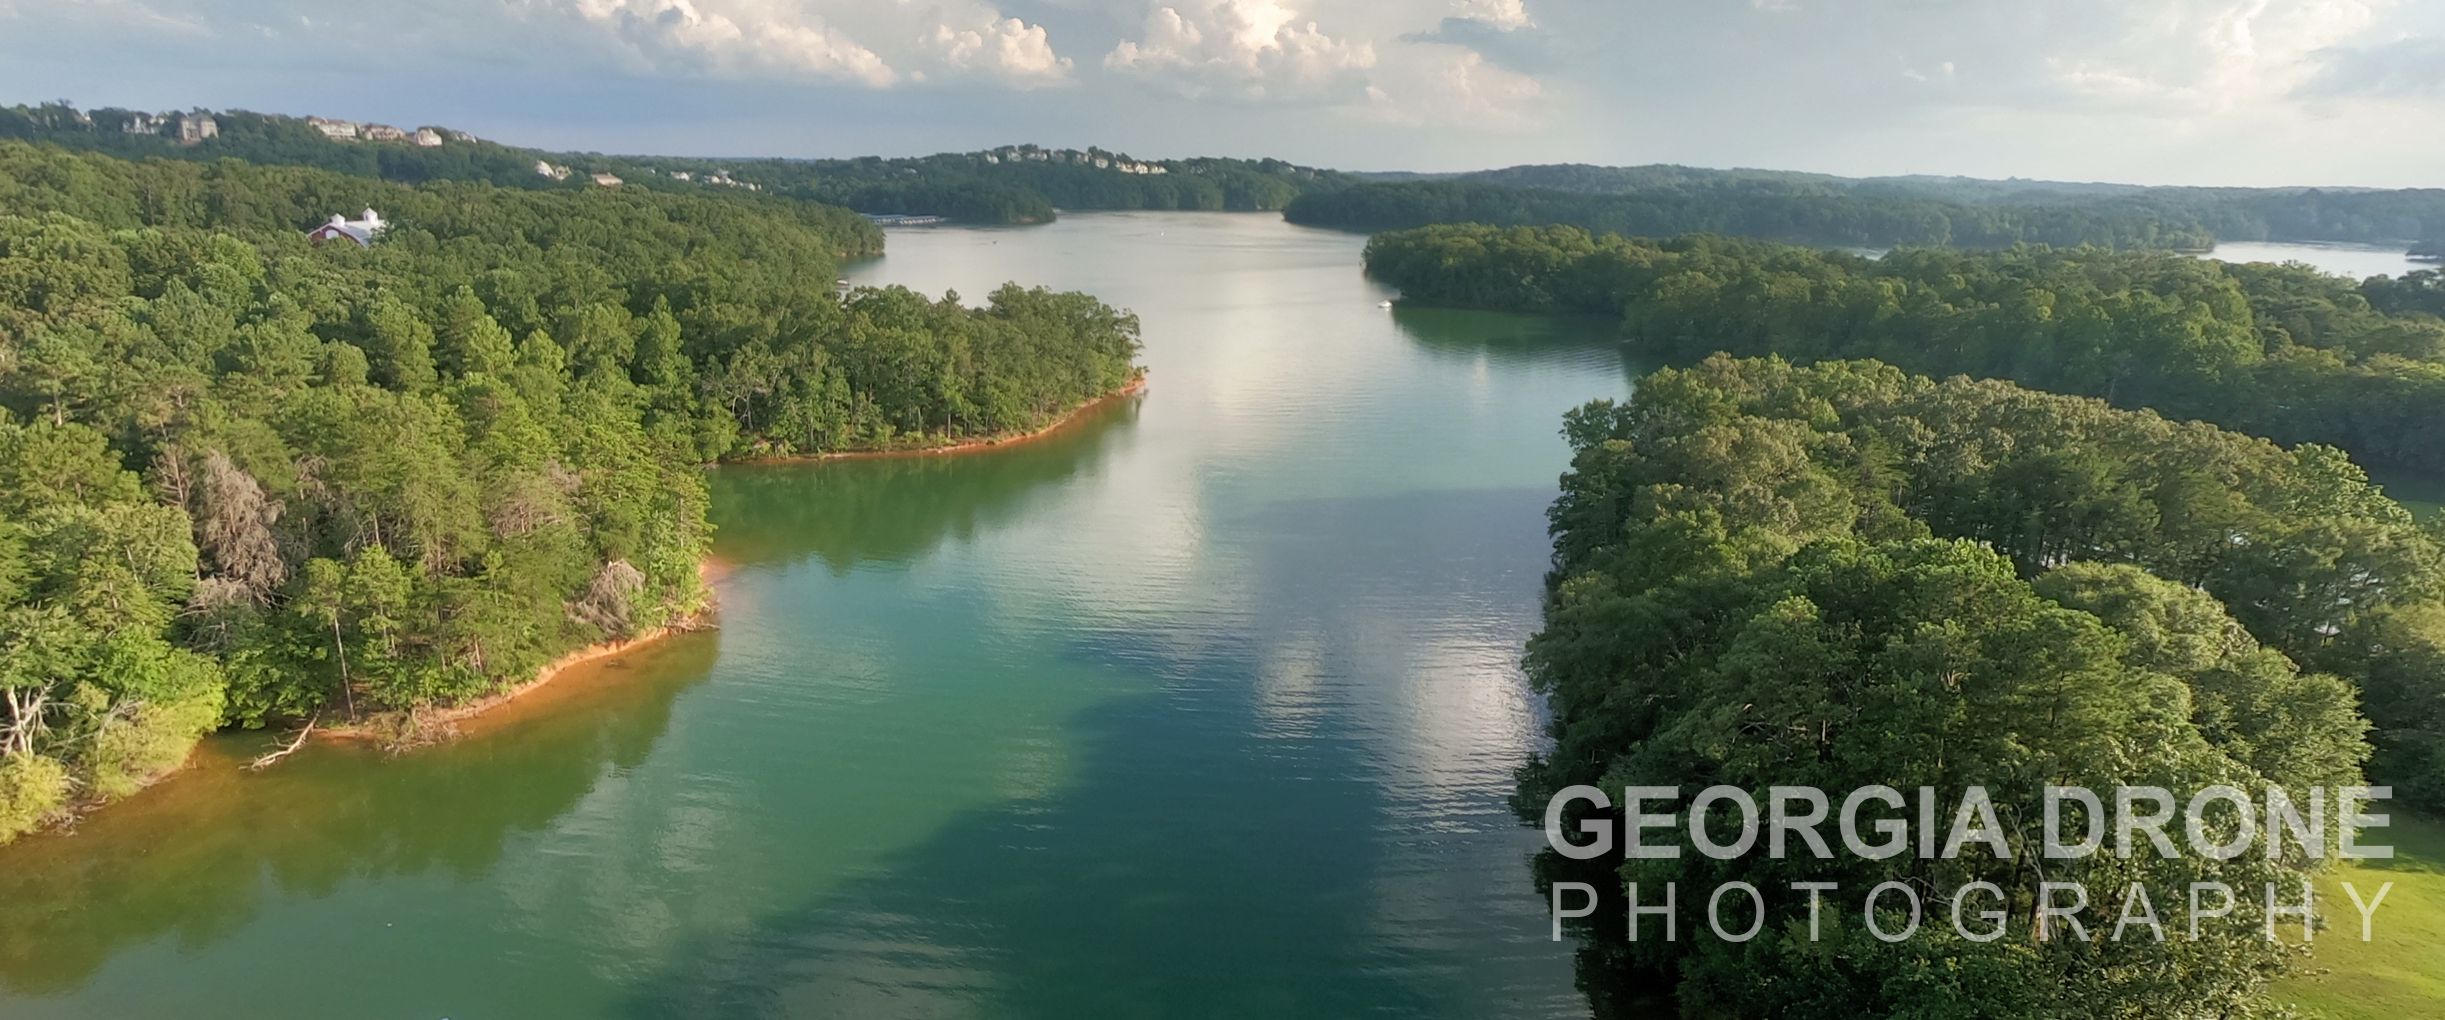 Drone photography of Lake Lanier real estate for sale.